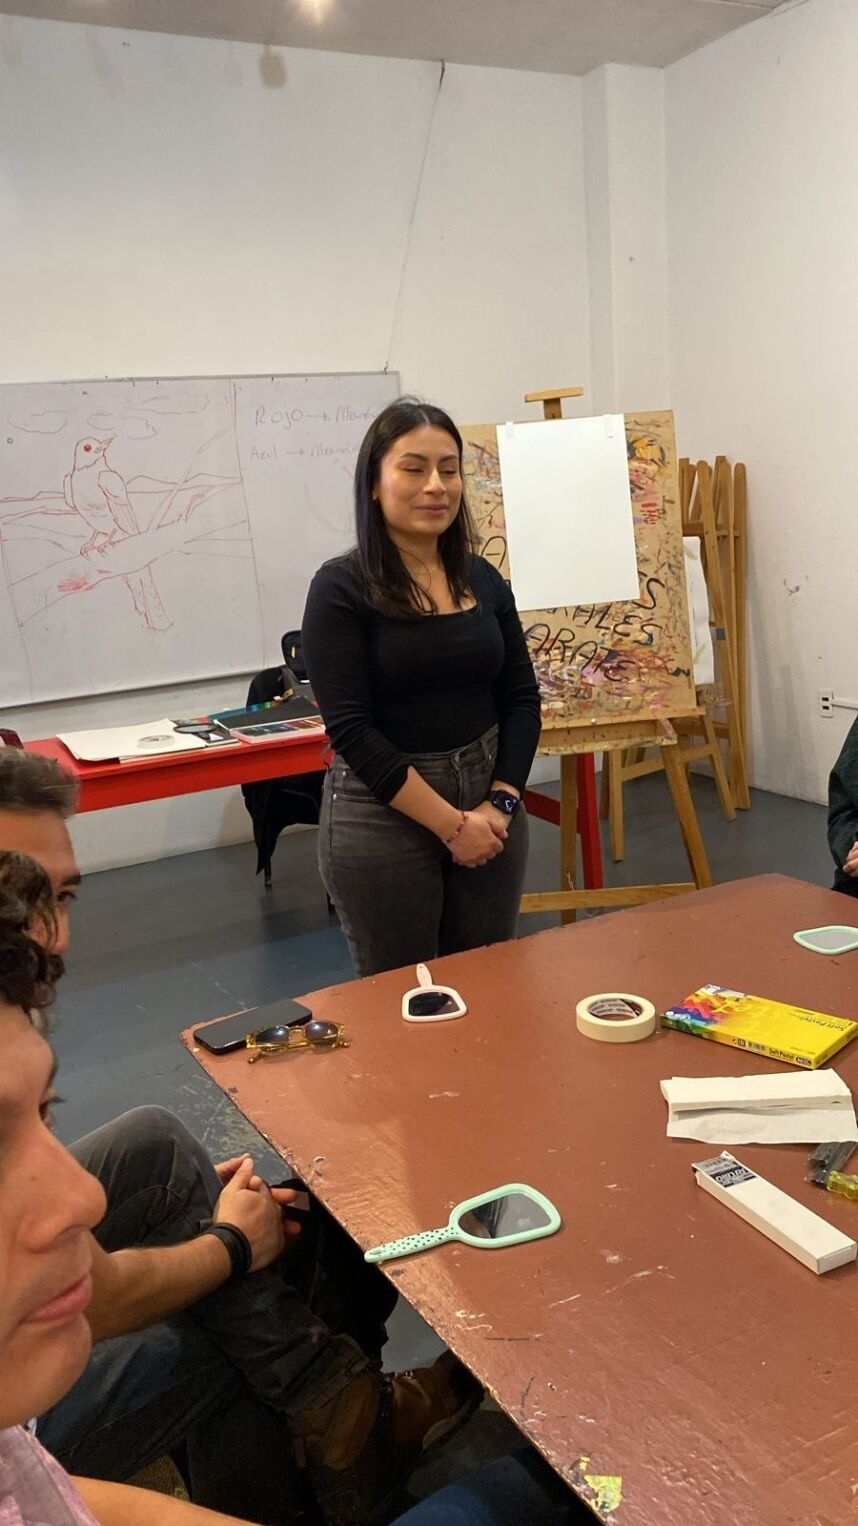 Artist Arely Morales leads a workshop for young students where they learned the foundations of self-portraiture and its potential for self-expression.